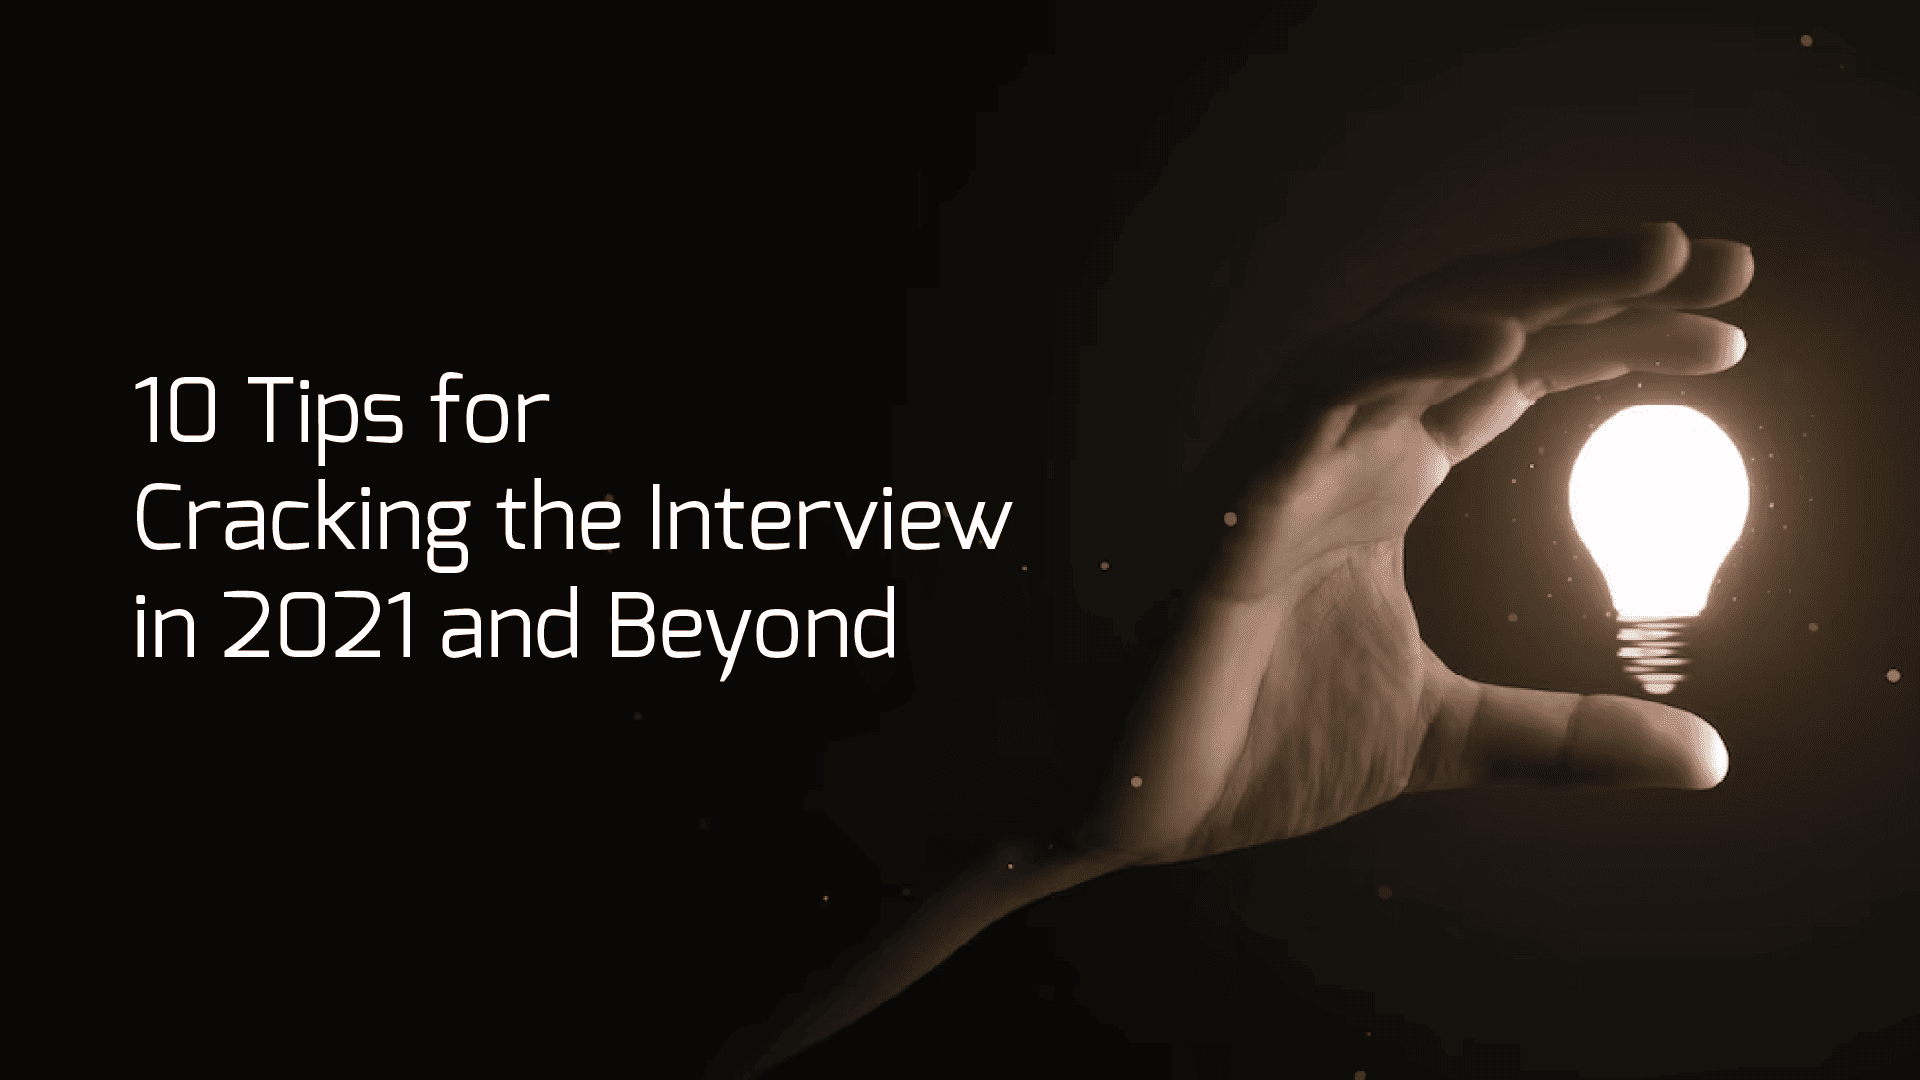 10 Tips for Cracking the Interview in 2021 and Beyond